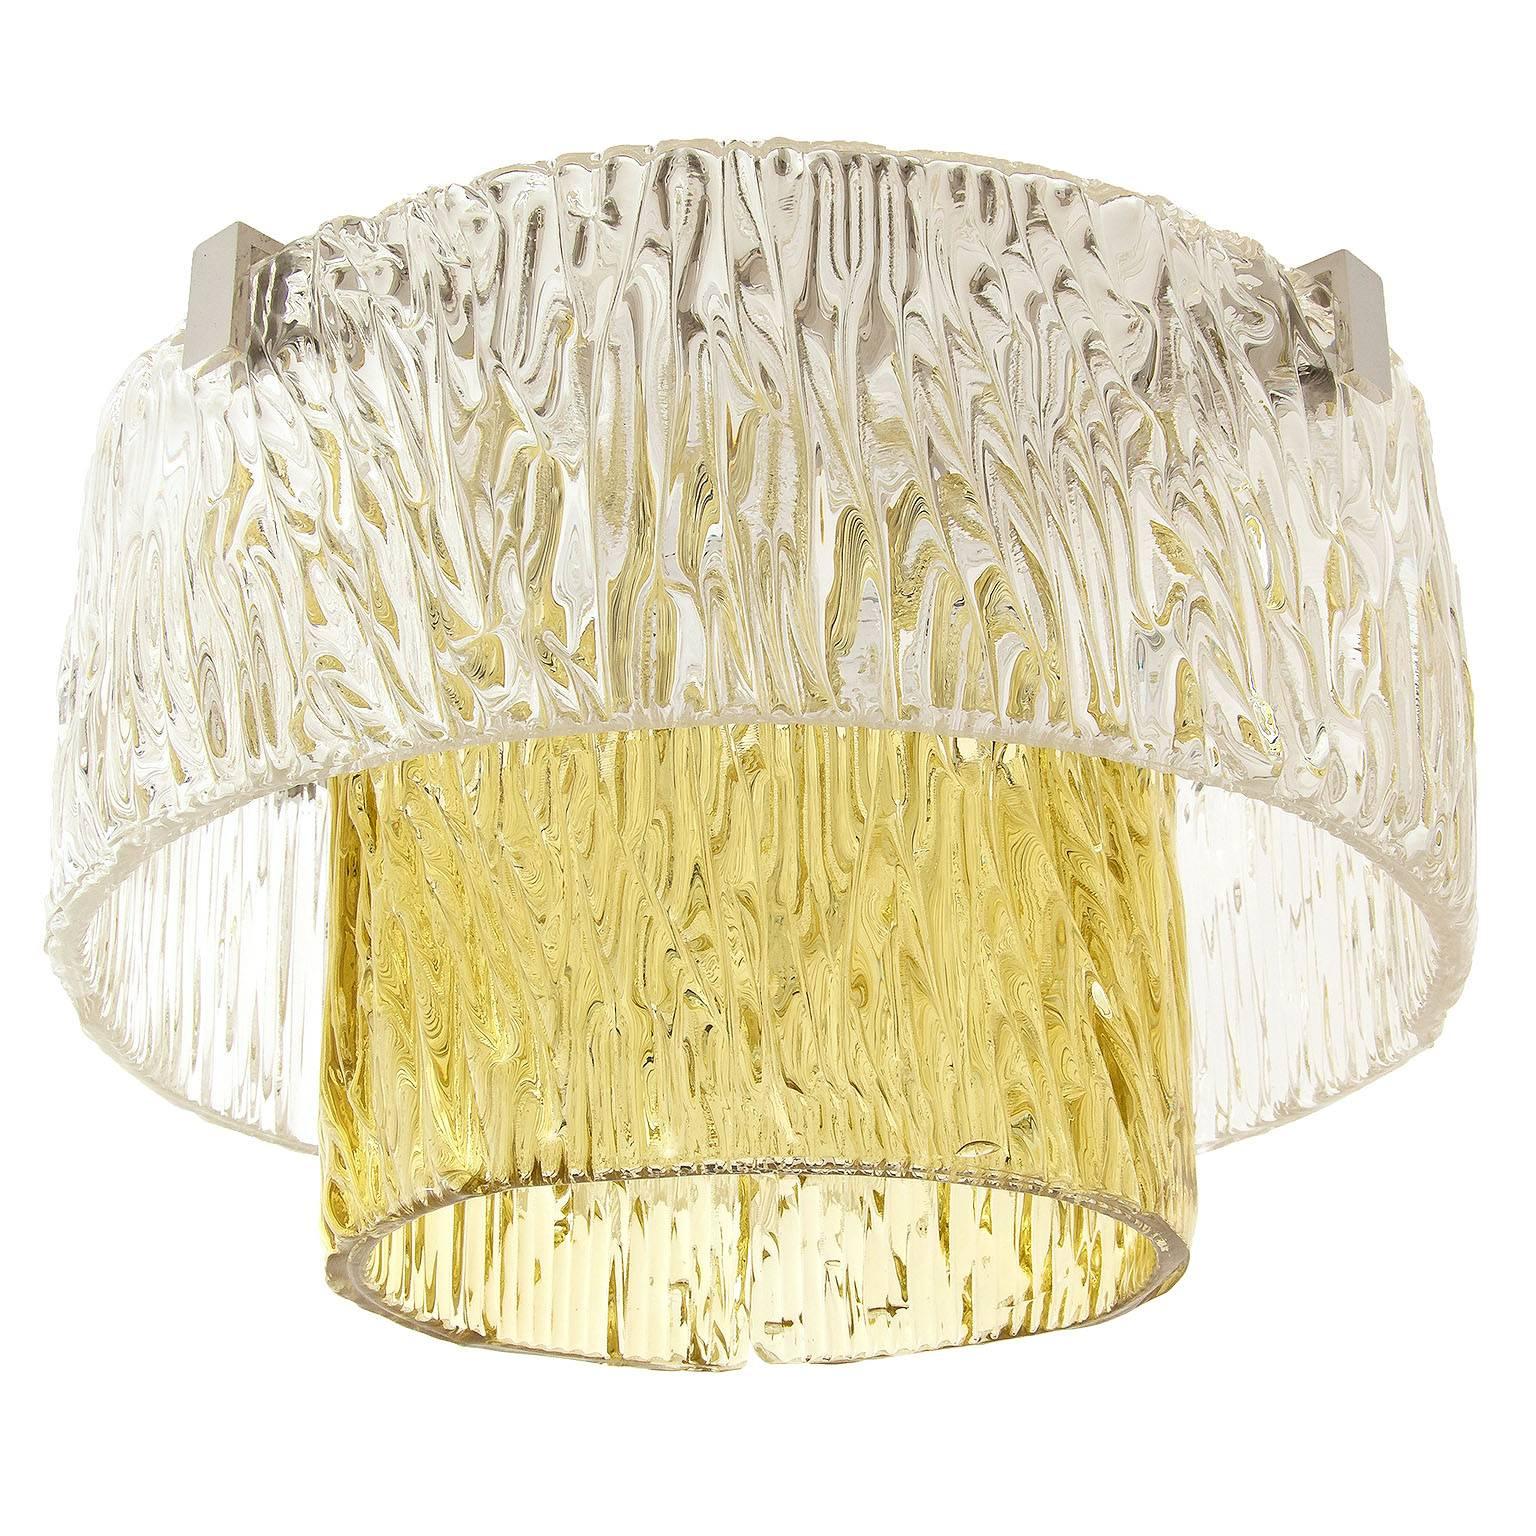 Only three pieces are available.

One of three fantastic textured glass and nickel-plated brass light fixtures by J.T. Kalmar, Austria, manufactured in Mid-Century, circa 1960. 
The outer tier is made of two clear glass half rings. The inner ring is